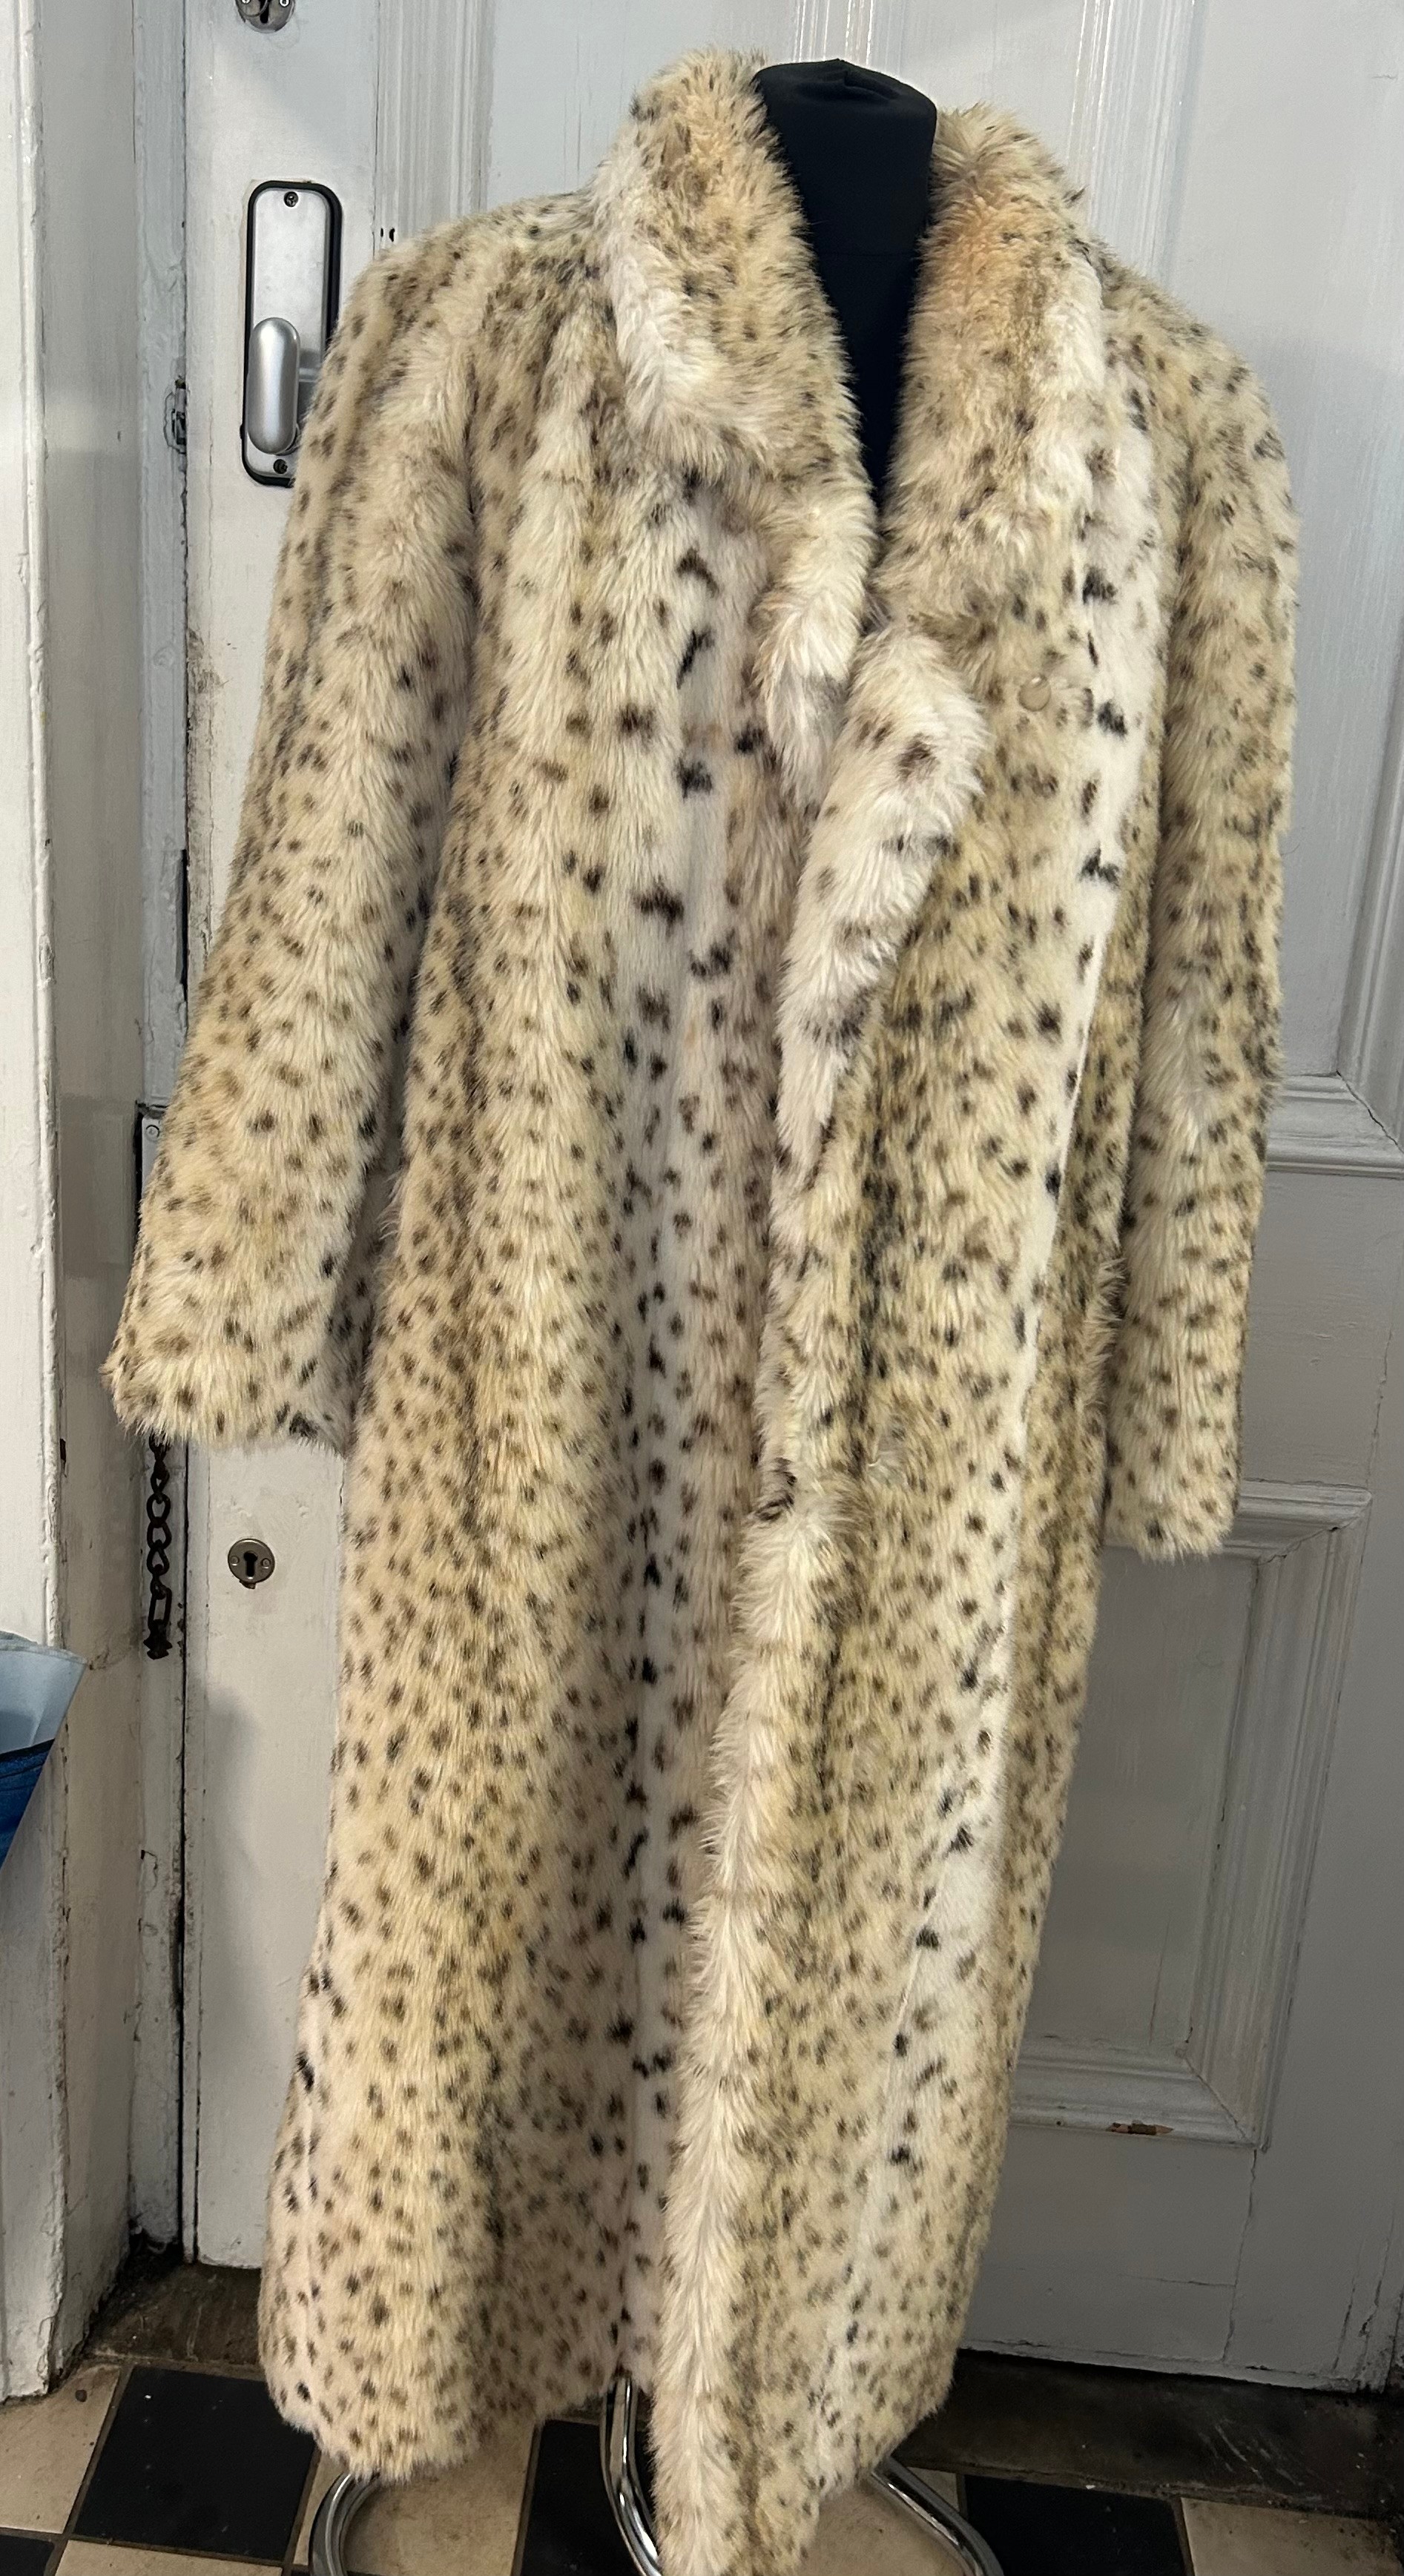 An Astraka of London faux fur leopard skin coat. Approx. 121cm from top of back collar to hem.